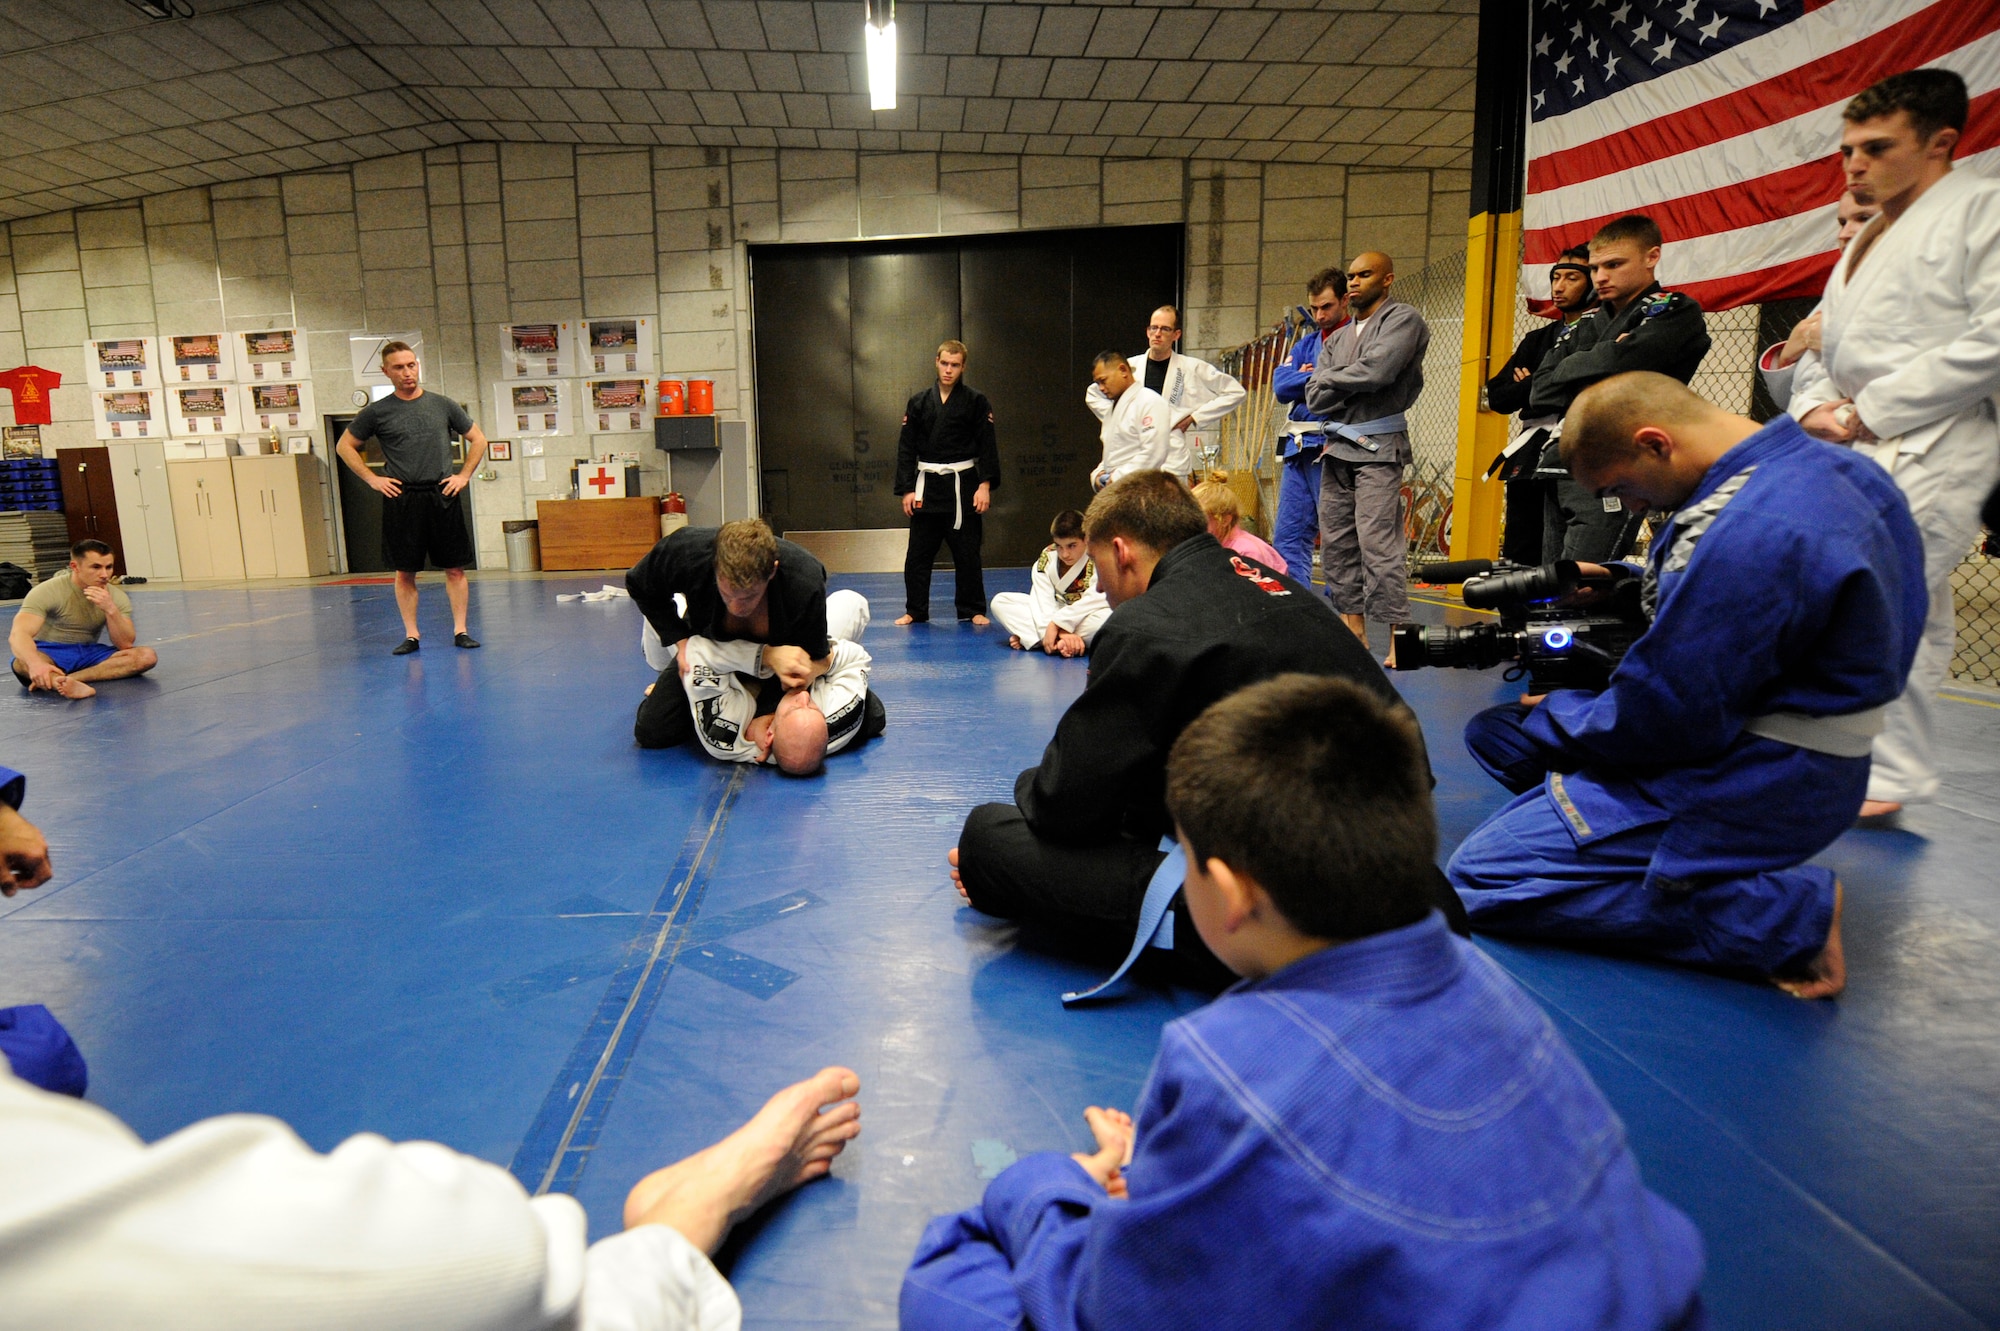 Students of the Brazilian Jiu-jitsu class practice fighting techniques during a class at Rhines Ordnance Barracks, Germany, Nov. 26, 2012. Students here go over different self-defense techniques. Many different people come through the class all with different skill levels.  Some people practice Jujitsu for the technique, others for fitness or even just for self-defense. Classes are every Monday and Wednesday at 6 p.m. to 8 p.m. (U.S. Air Force photo/ Senior Airman Aaron-Forrest Wainwright) 